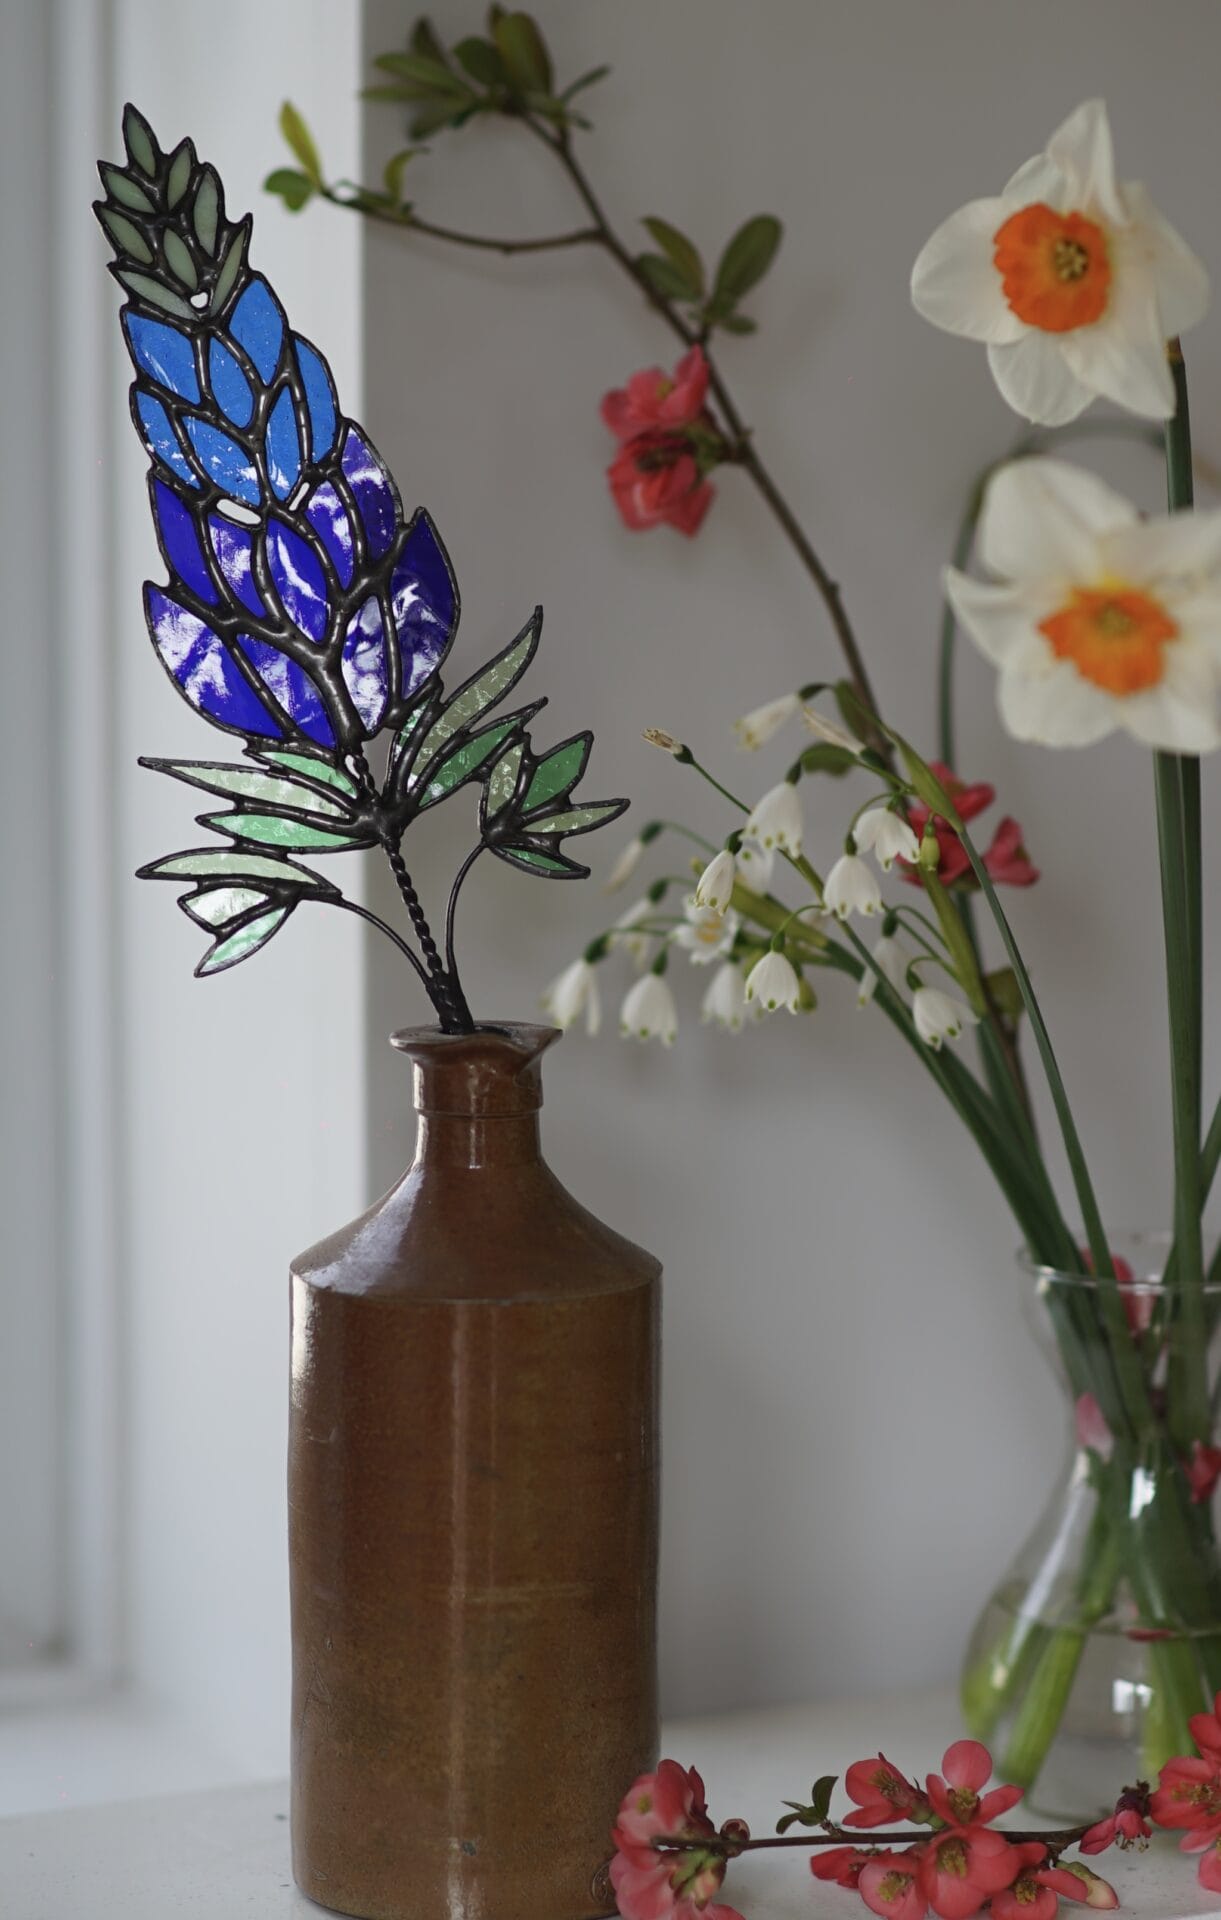 stained glass flowers and vines in ceramic vases alongside live specimens